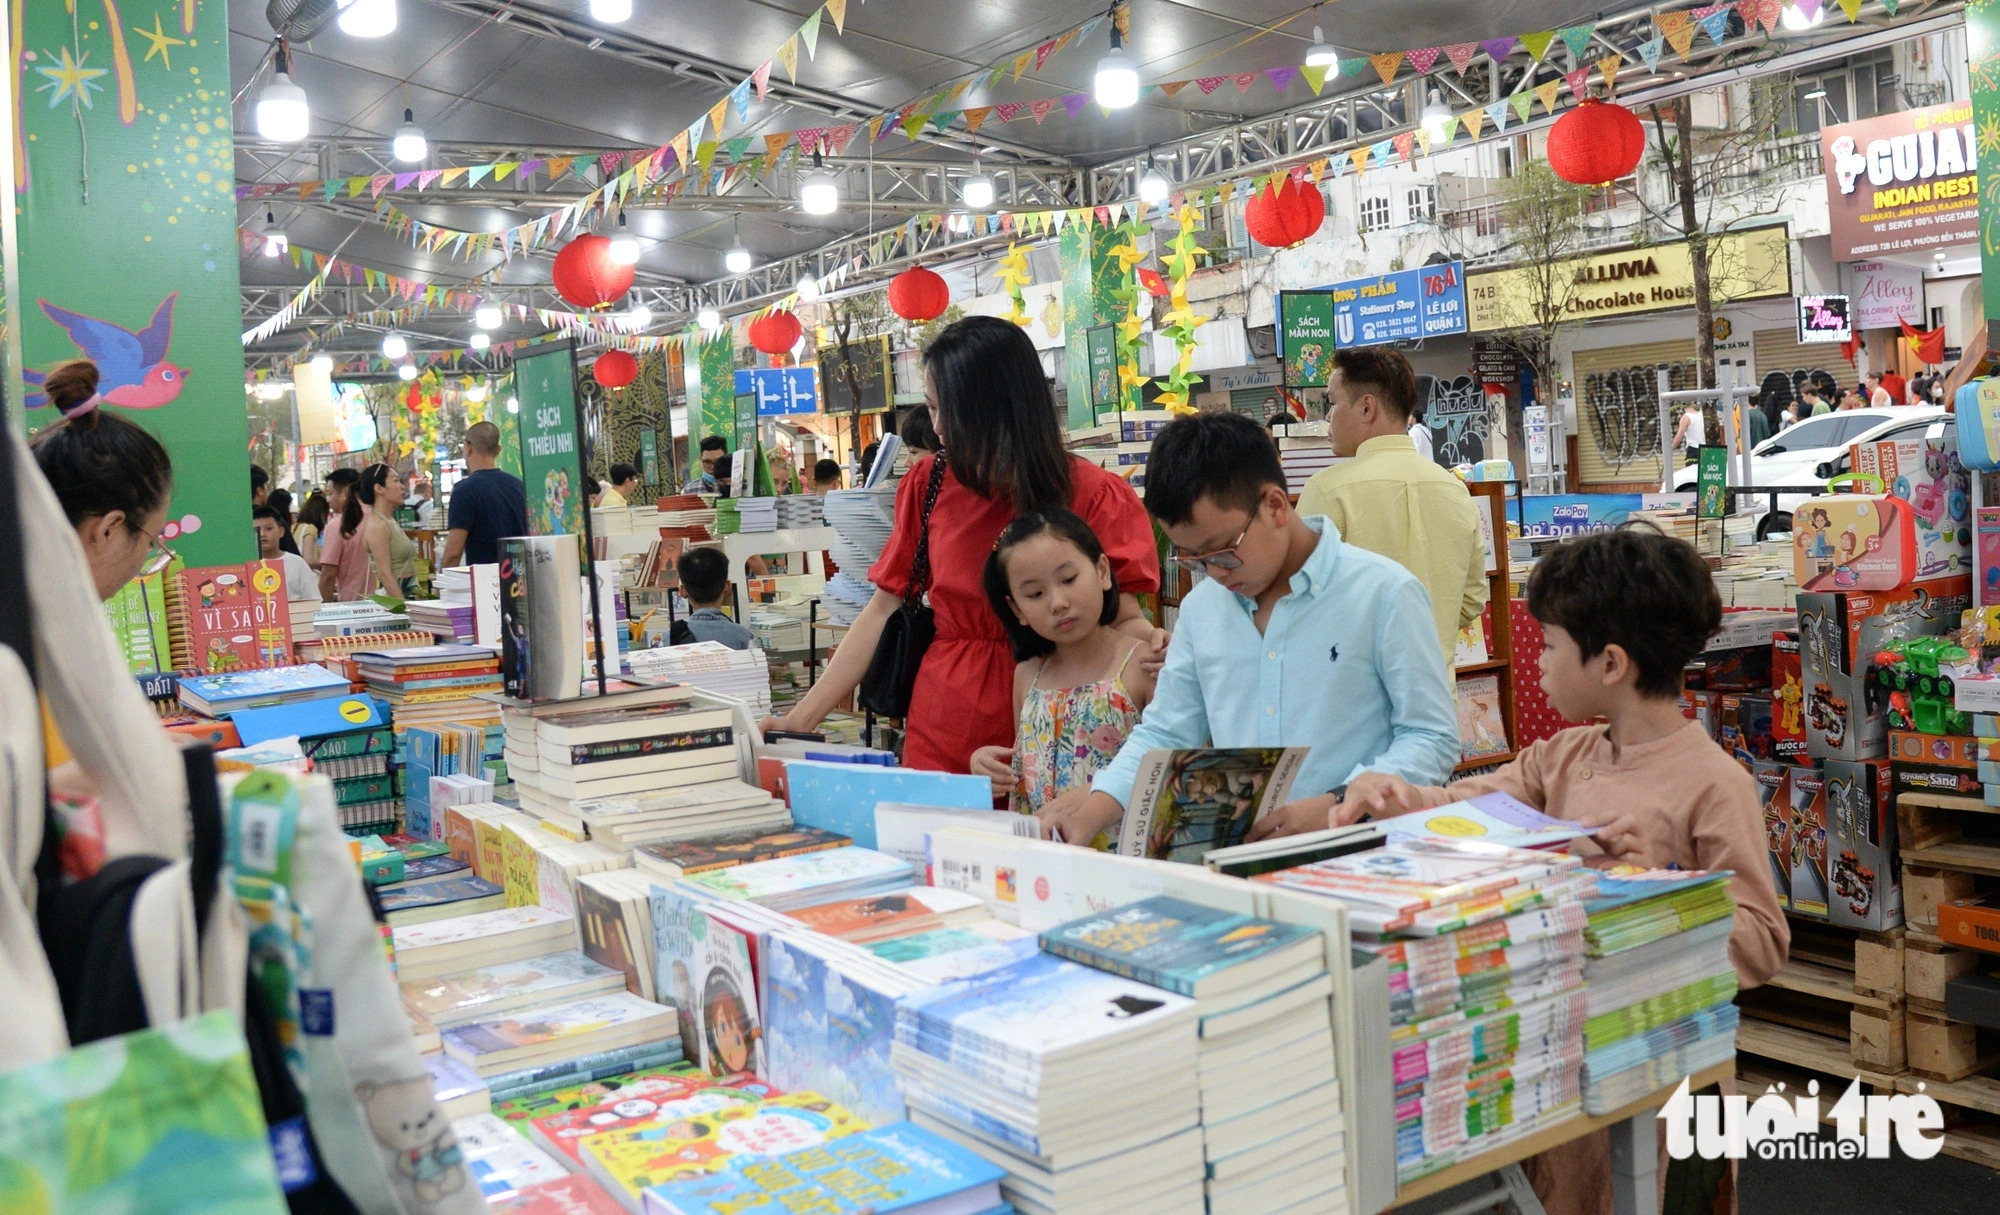 More than 65,000 books of various genres are being offered at the Lunar New Year book festival held on Le Loi Street, District 1, Ho Chi Minh City. Photo: Tu Trung / Tuoi Tre